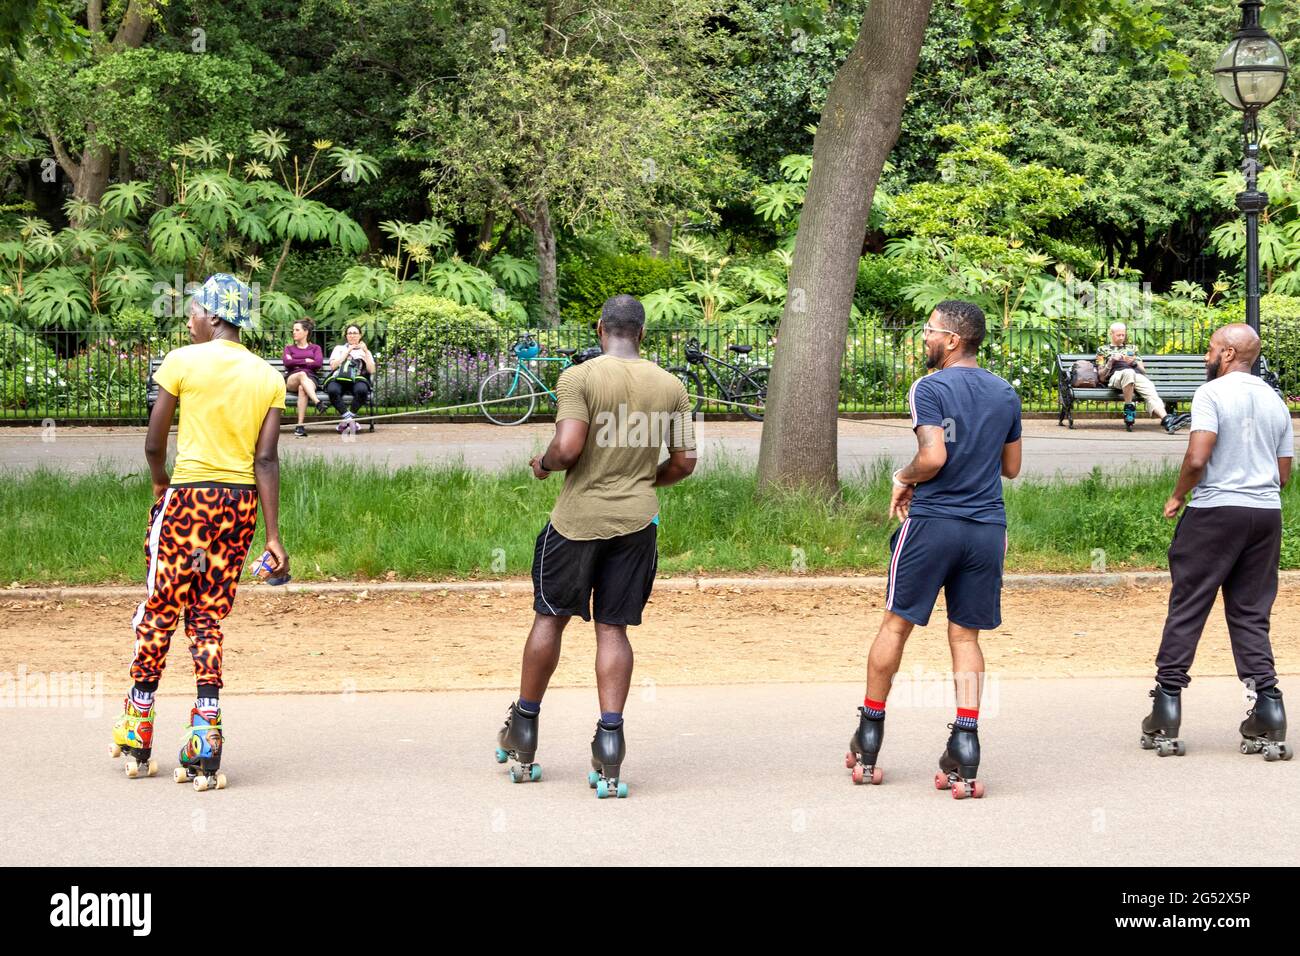 LONDON HYDE PARK LONDON'S CULTURAL DIVERSITY FOUR ROLLER SKATERS IN SERPENTINE ROAD DANCING TO MUSIC Stock Photo